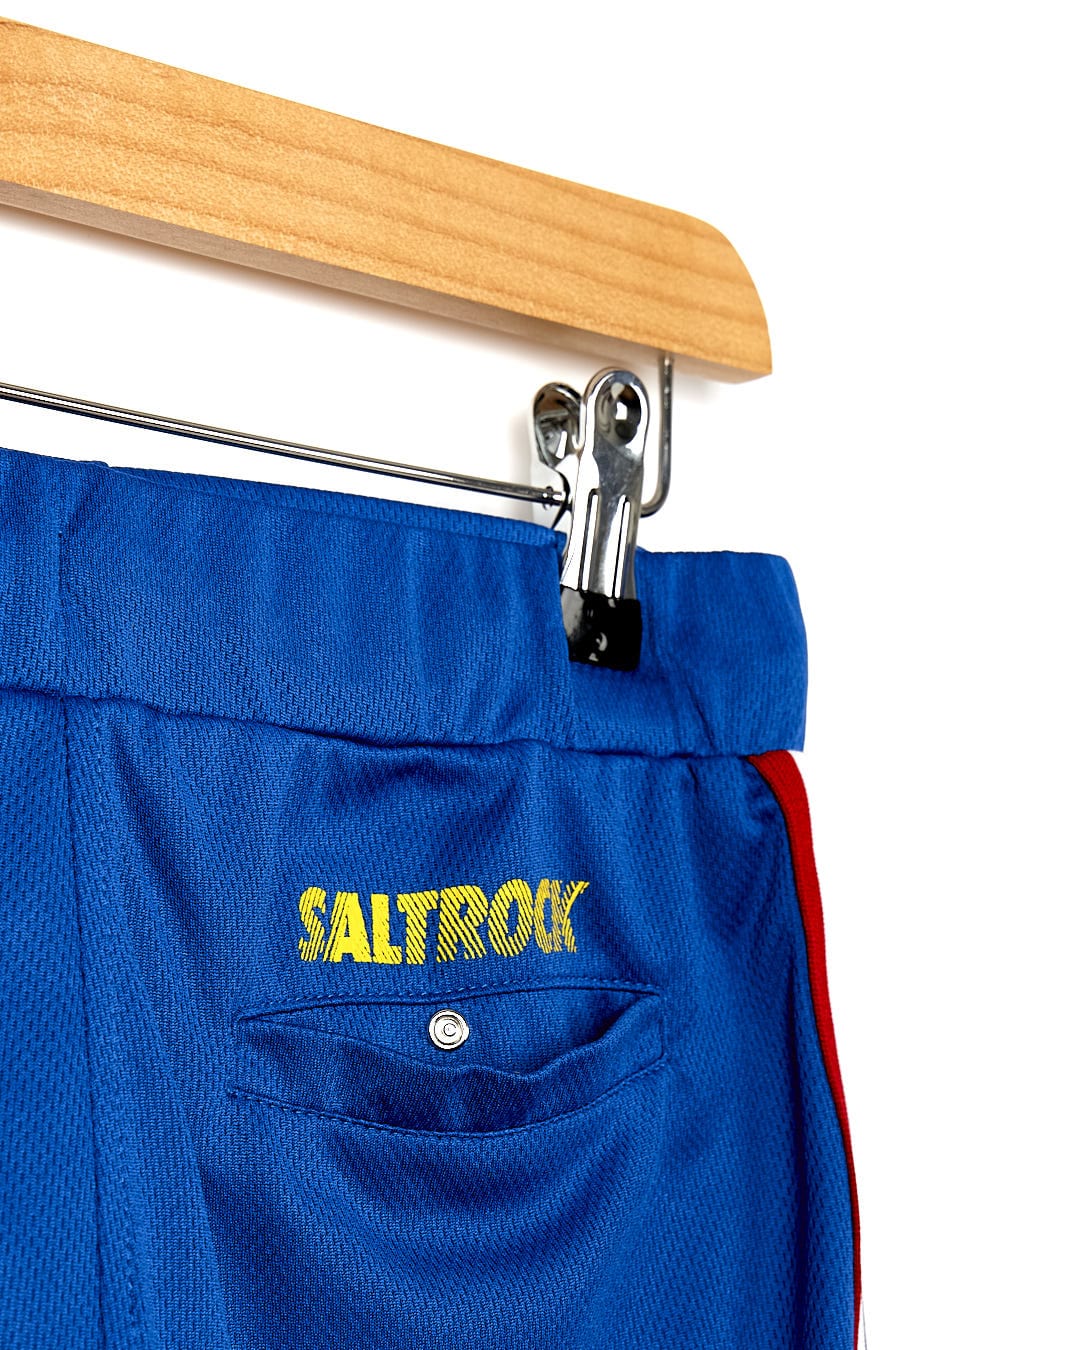 A pair of Team - Kids Tech Shorts - Blue with the word Saltrock on them.